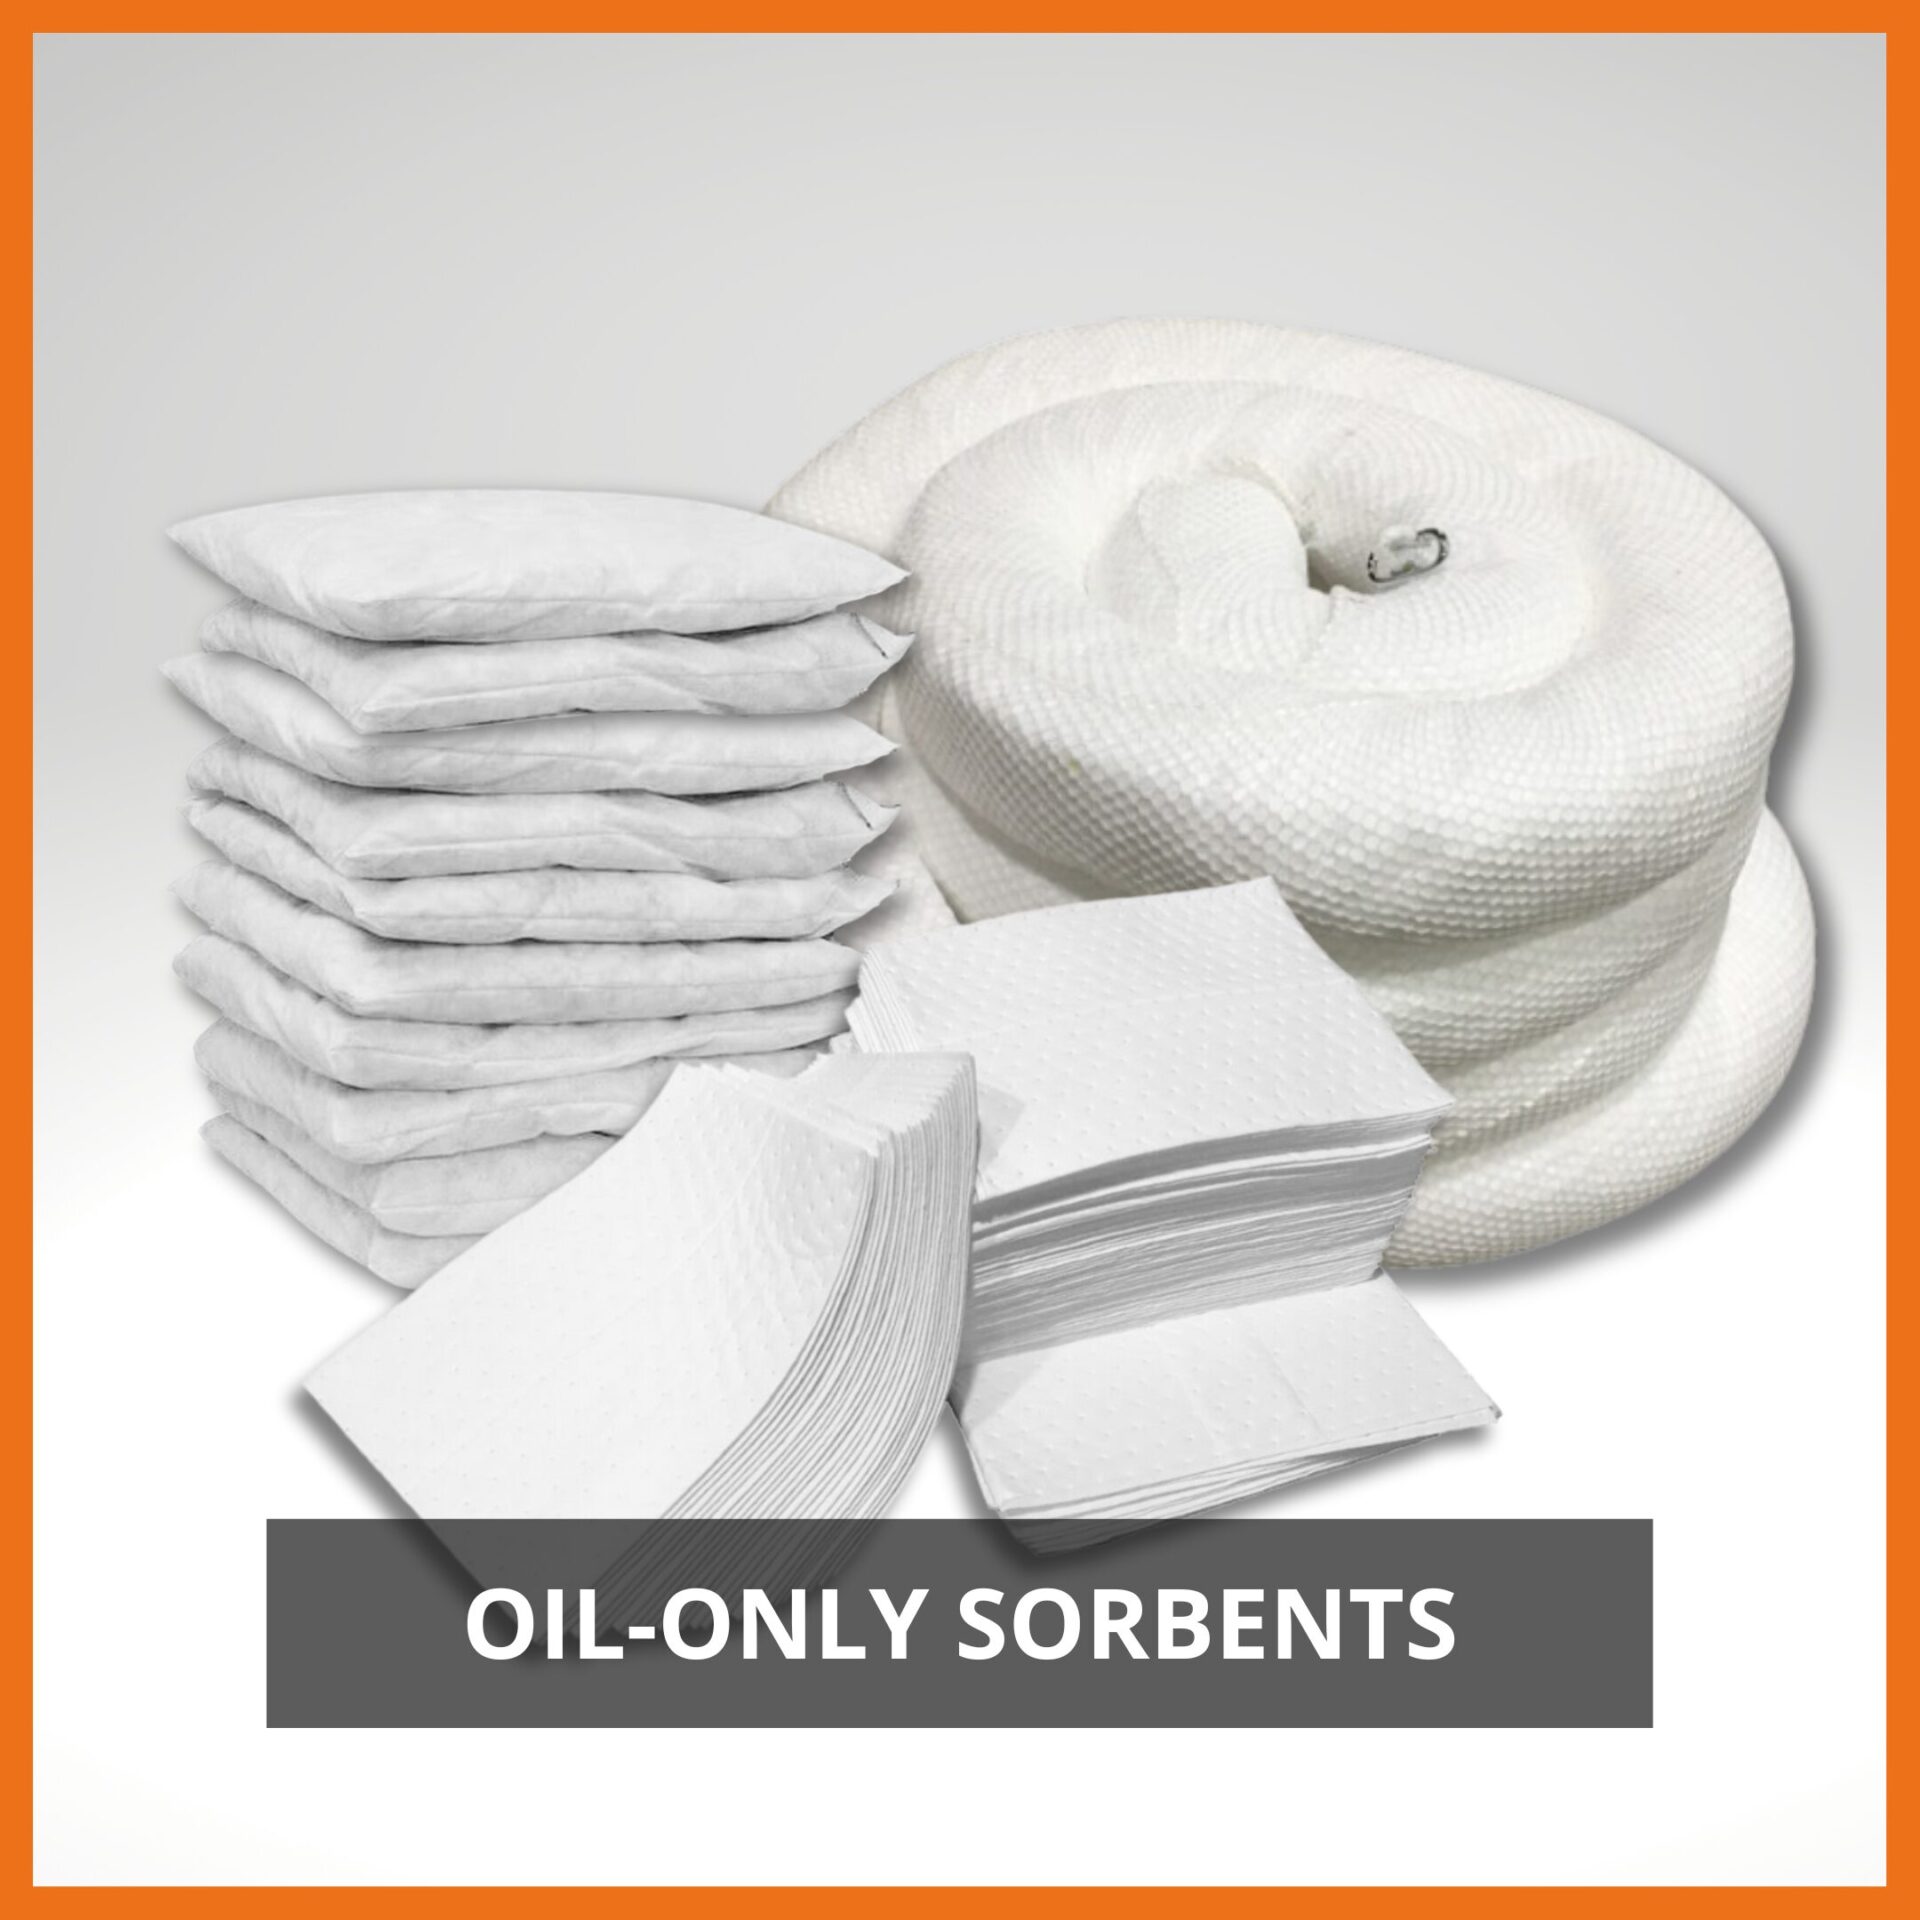 Oil-Only Sorbents